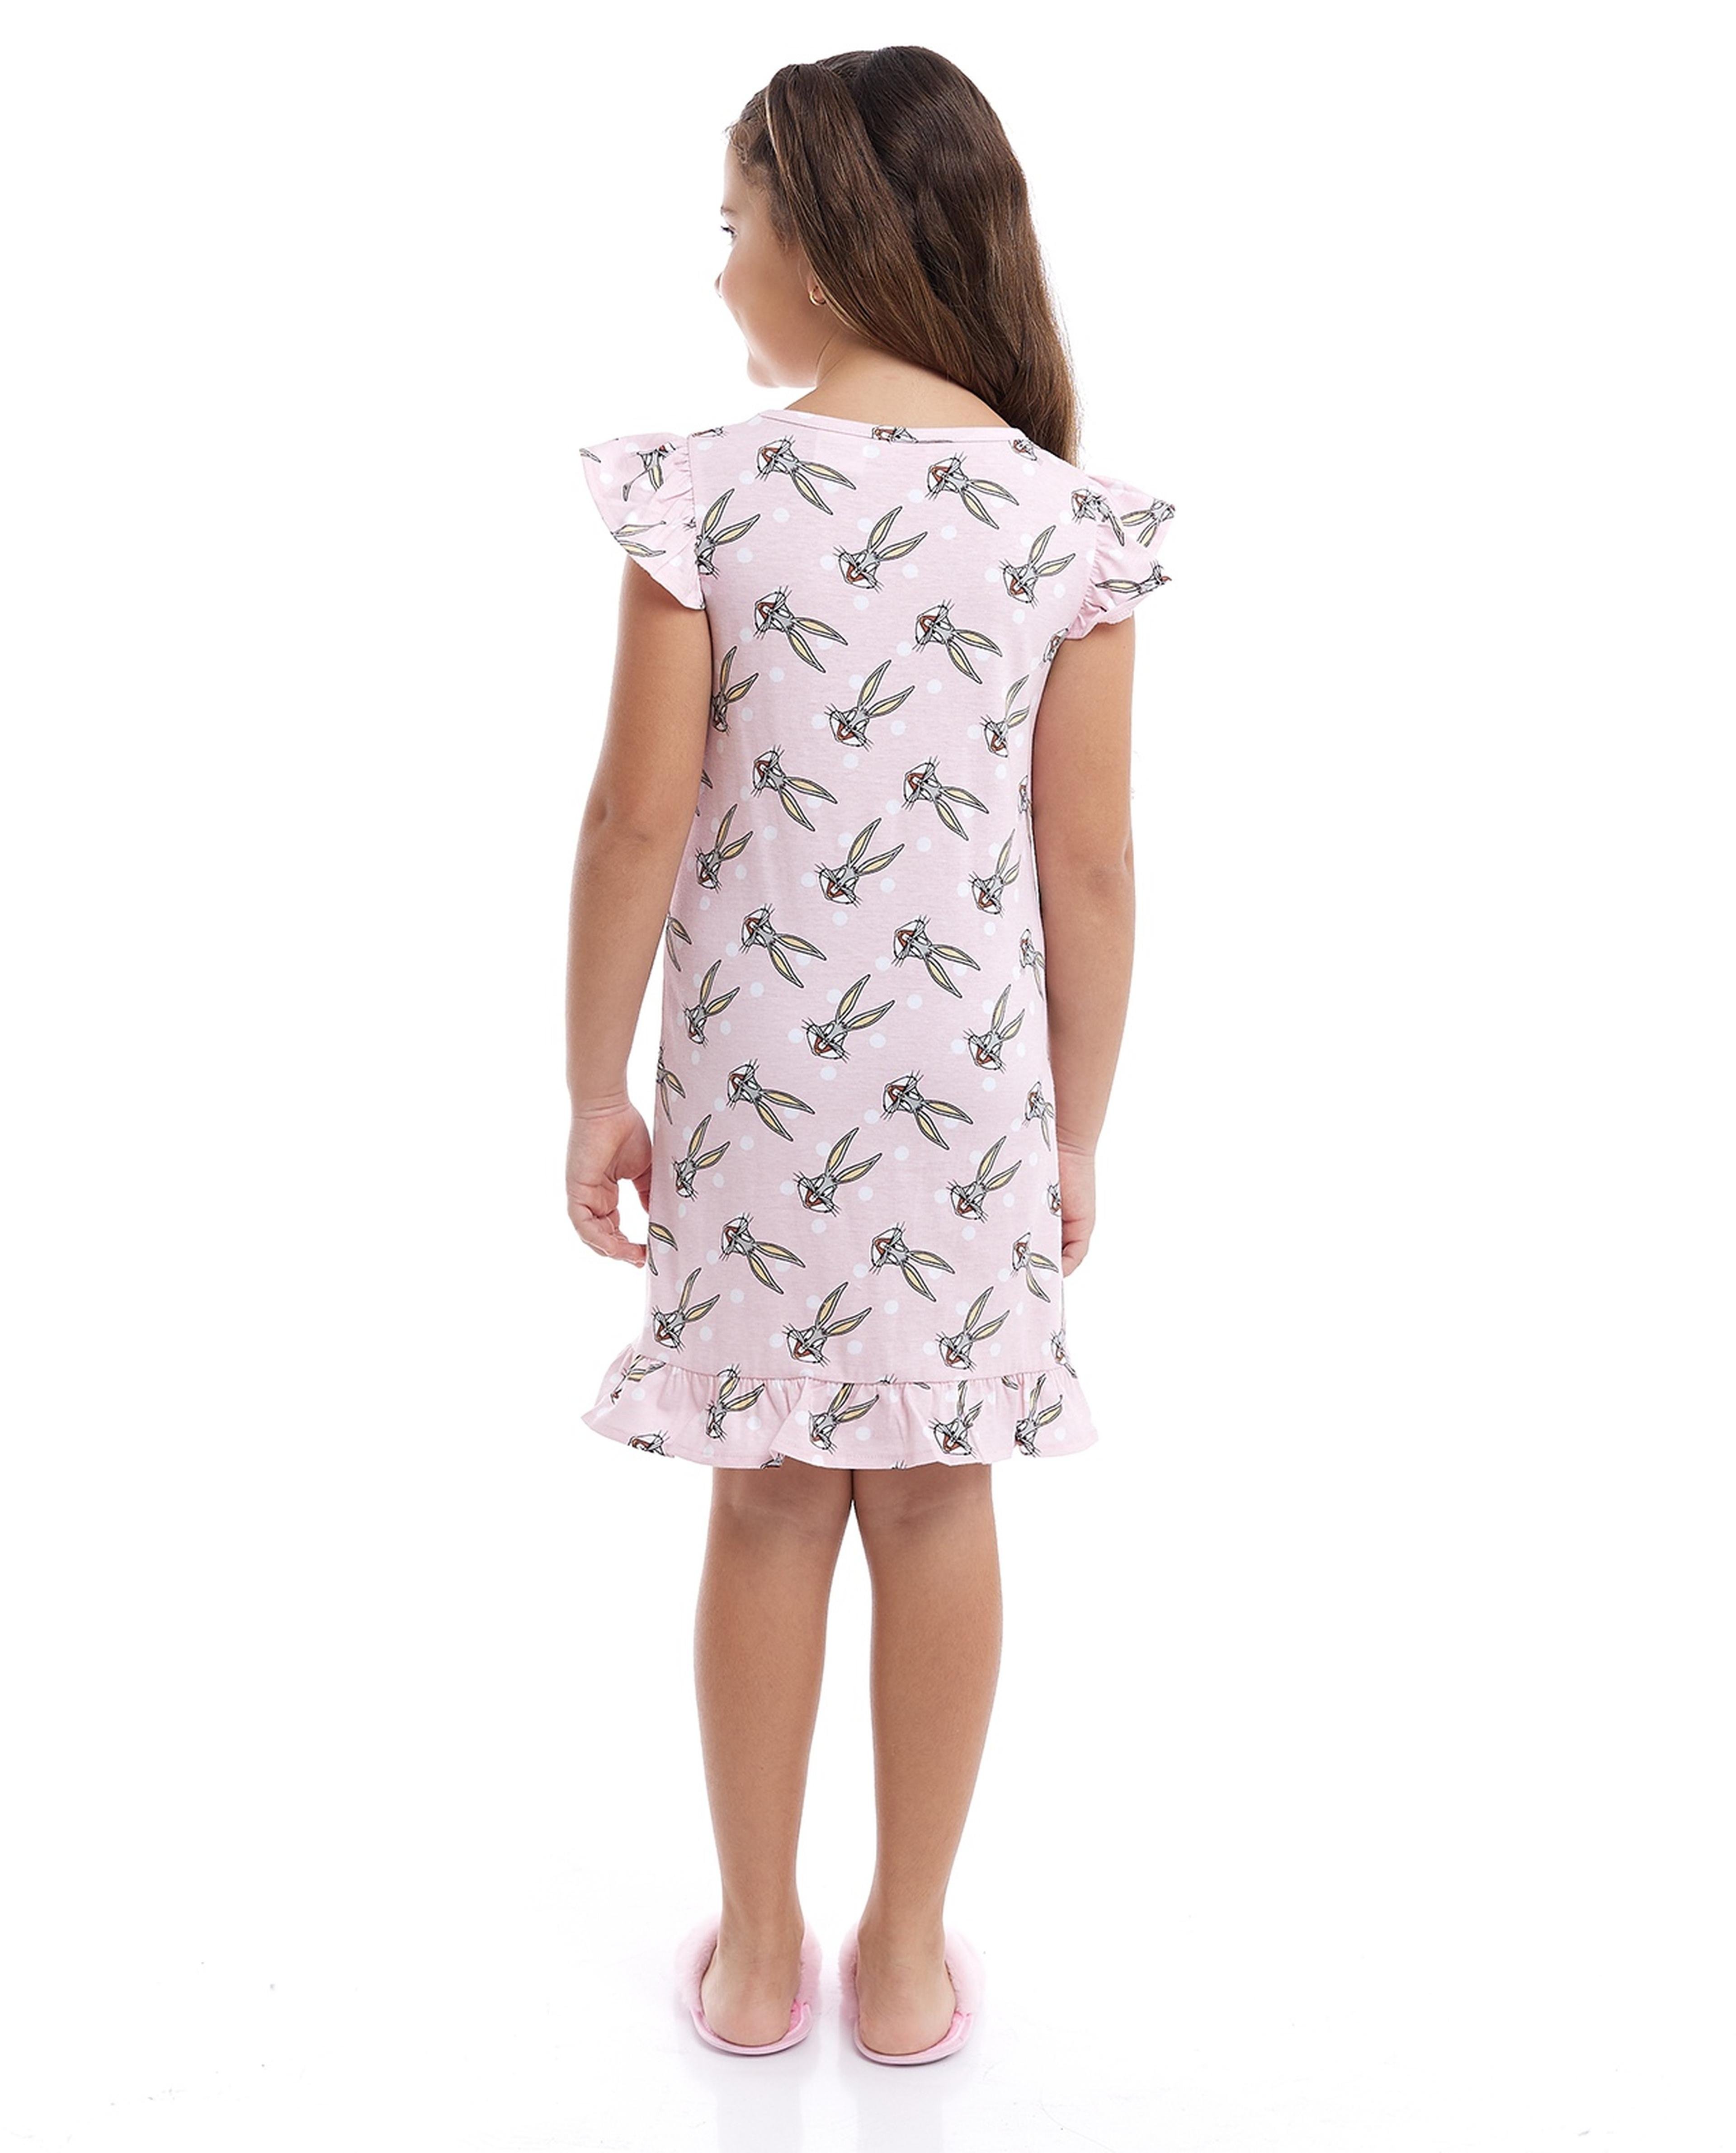 Bugs Bunny Printed Nightdress with Flutter Sleeves